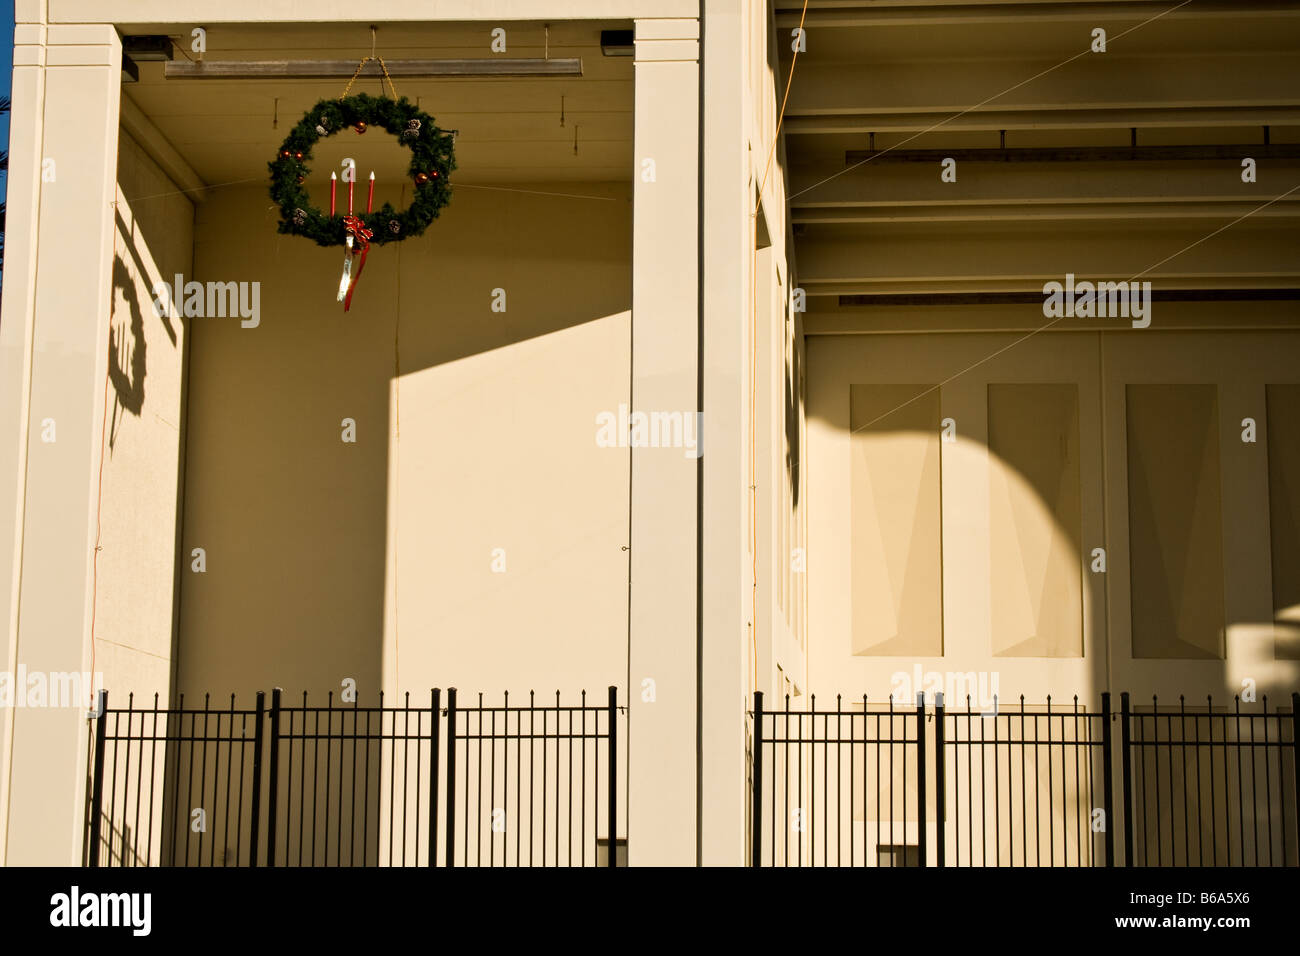 Christmas wreath with three candles on the side of an amphitheater hanging from the ceiling. Stock Photo